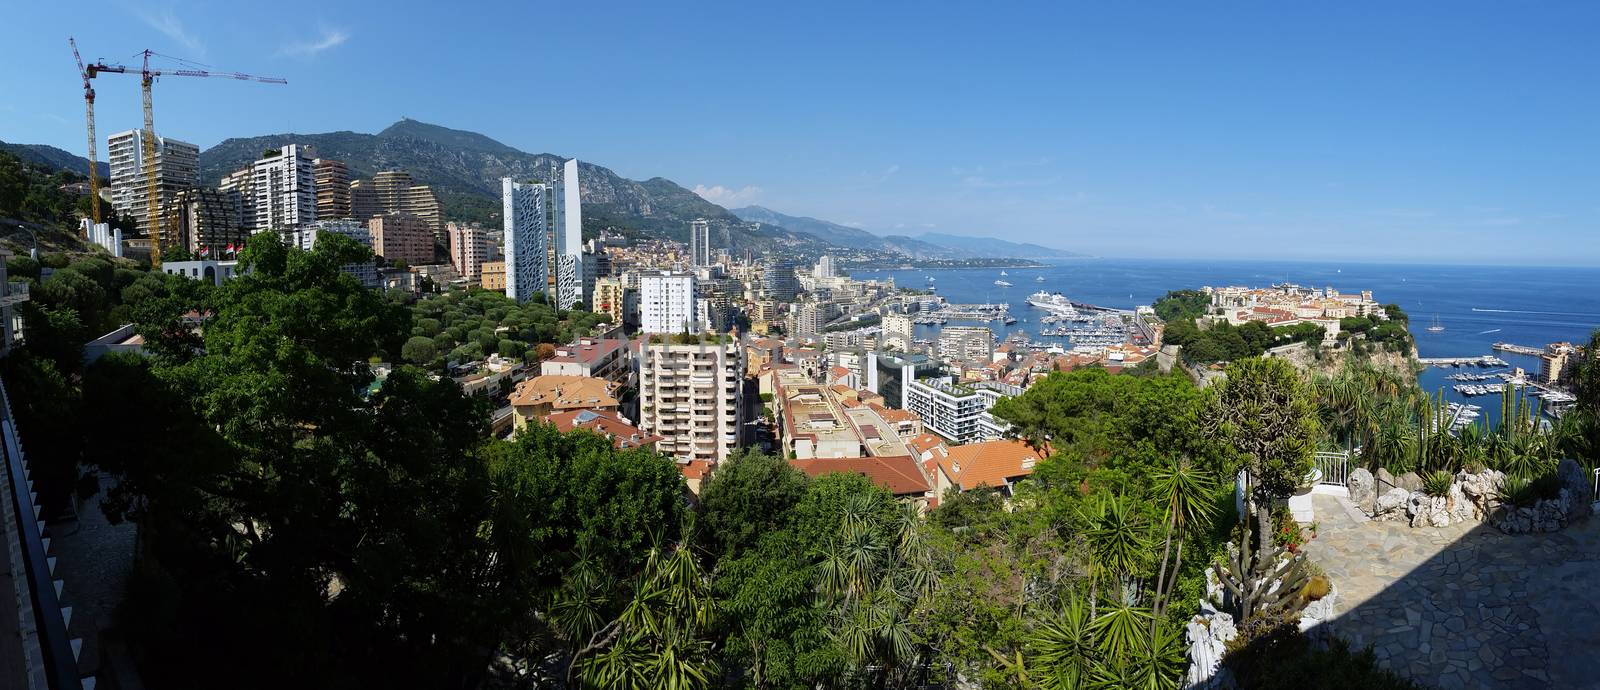 Panoramic view of Monaco from the Exotic Garden by bensib